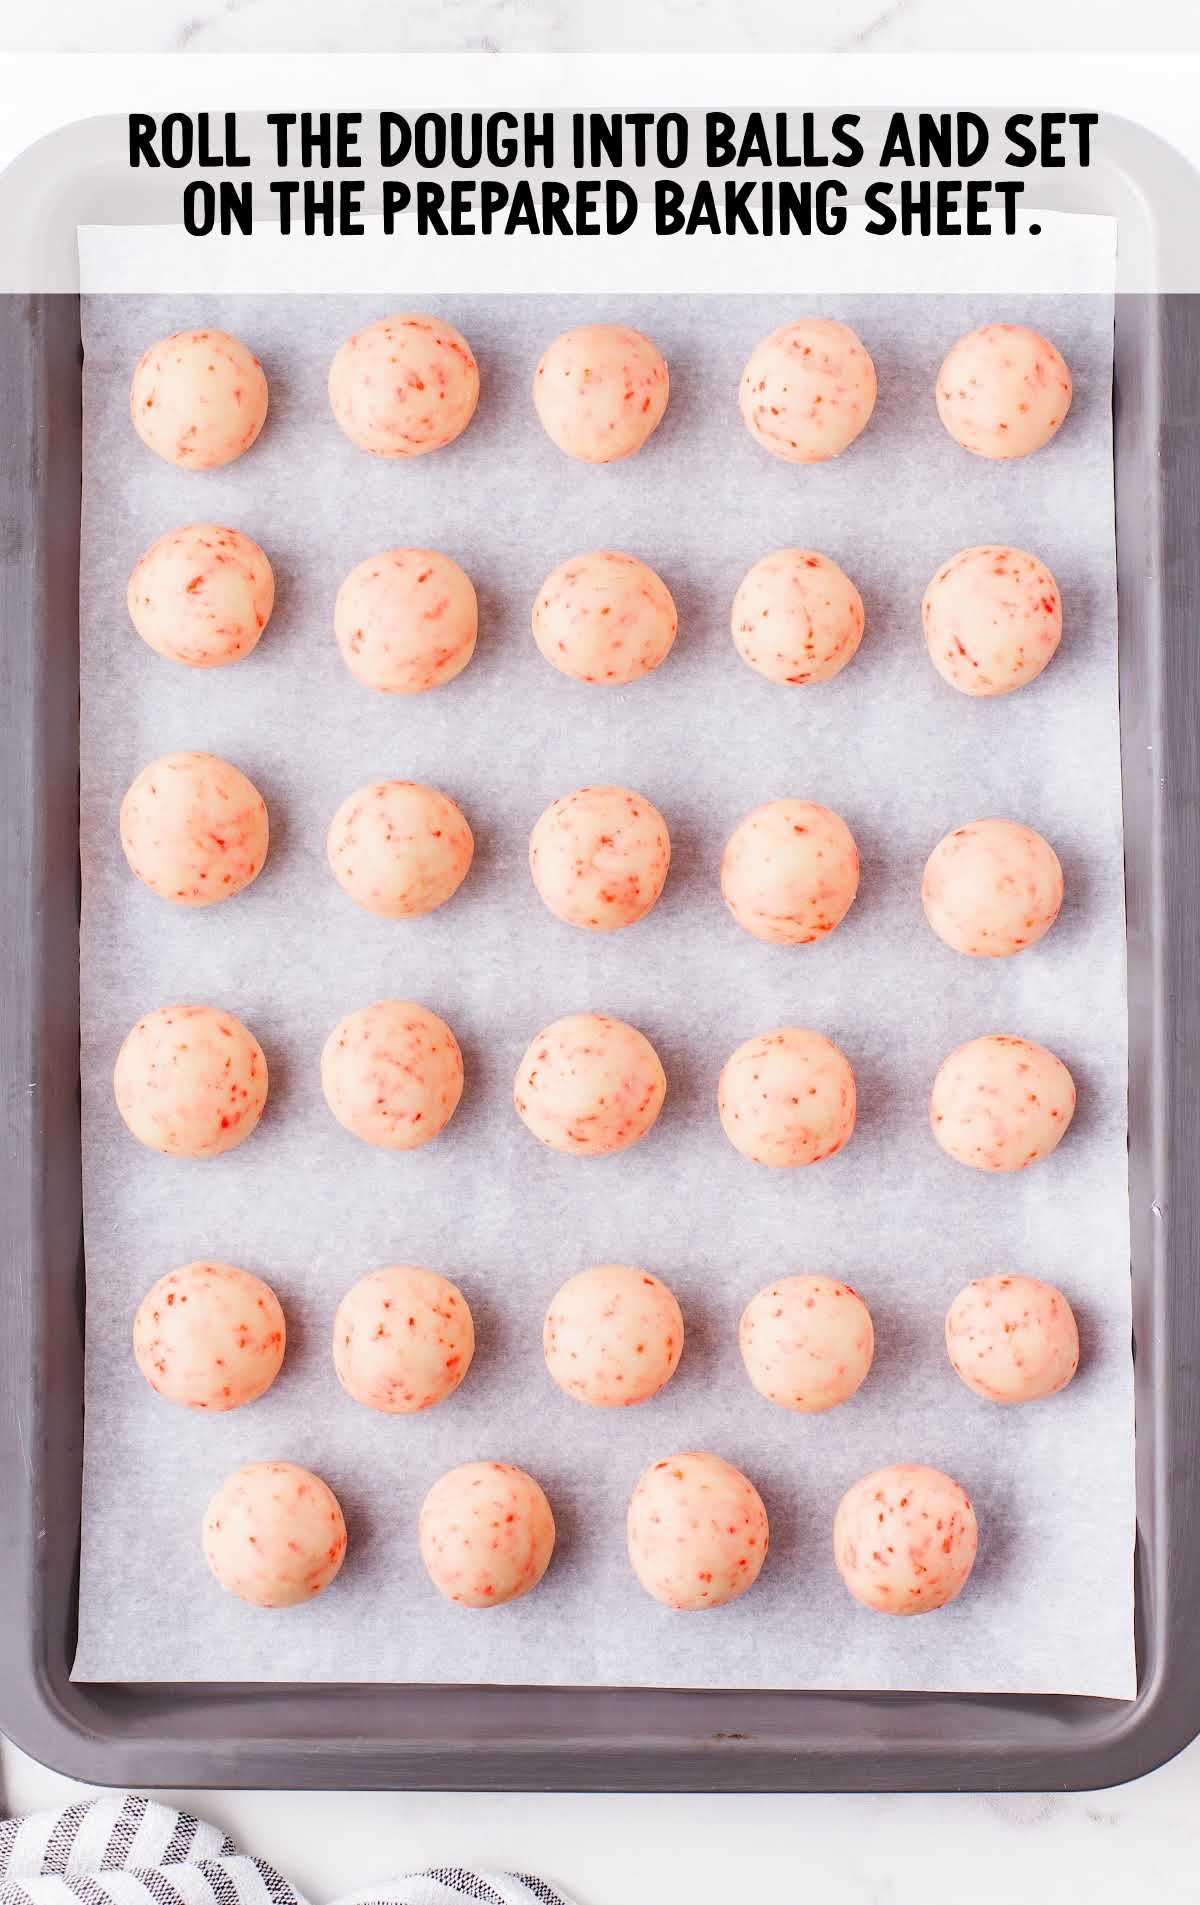 roll dough into balls and place on baking sheet